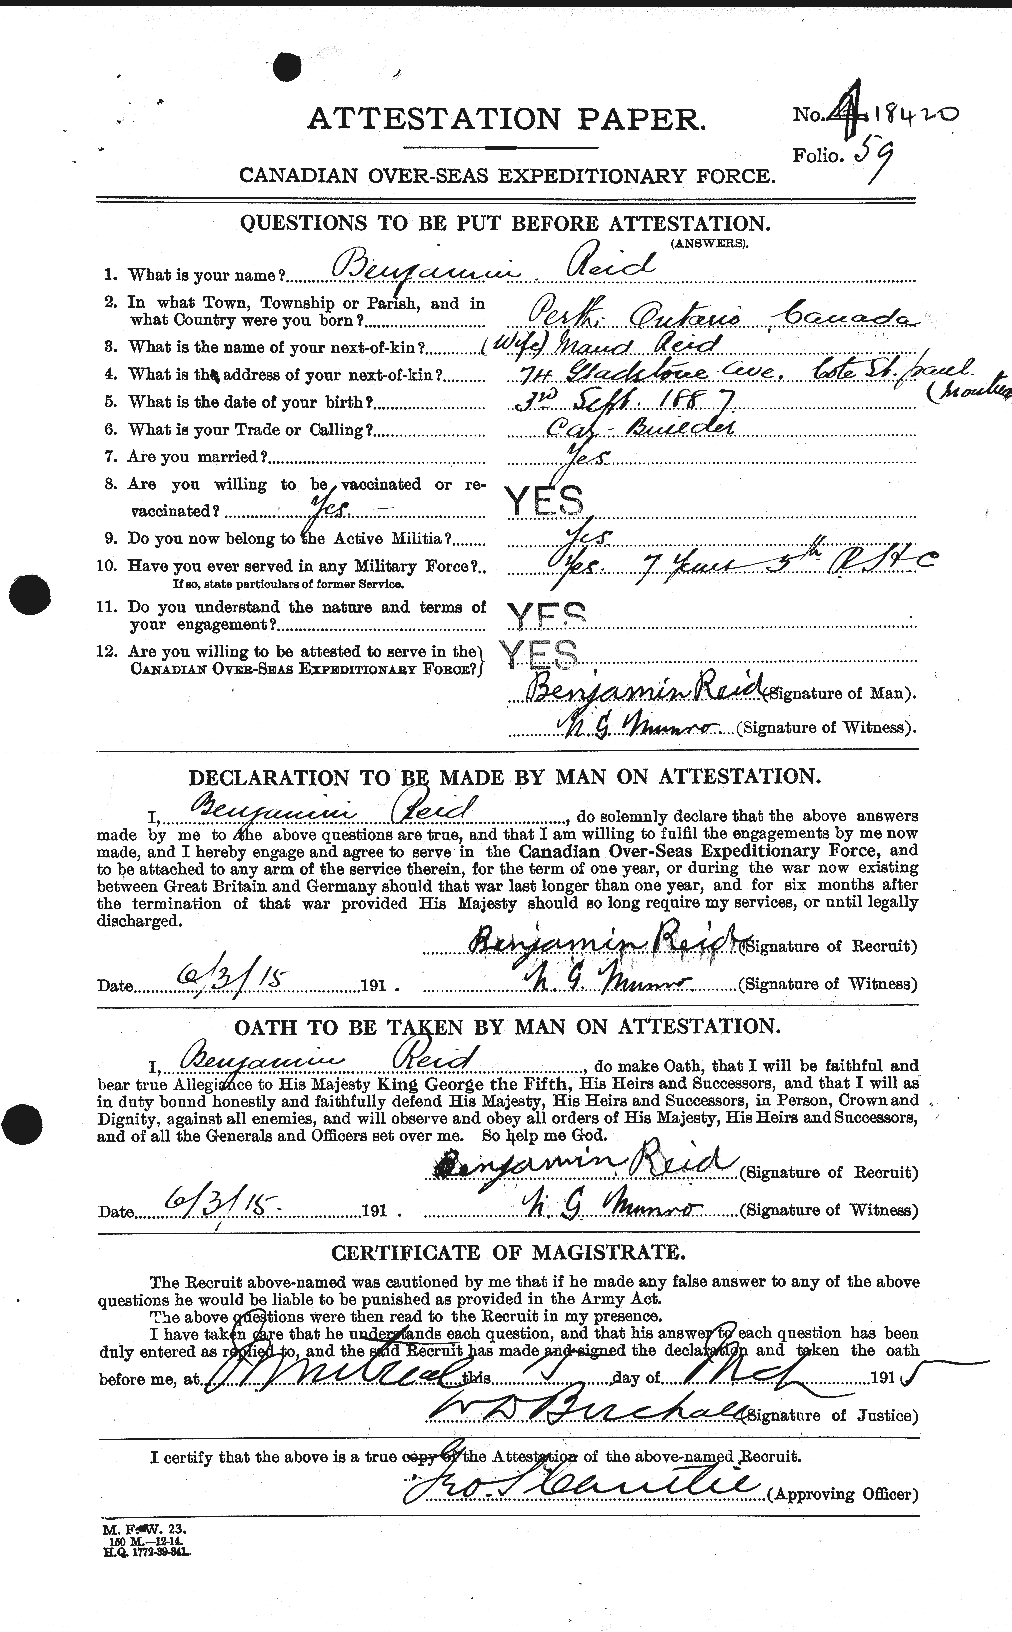 Personnel Records of the First World War - CEF 597854a